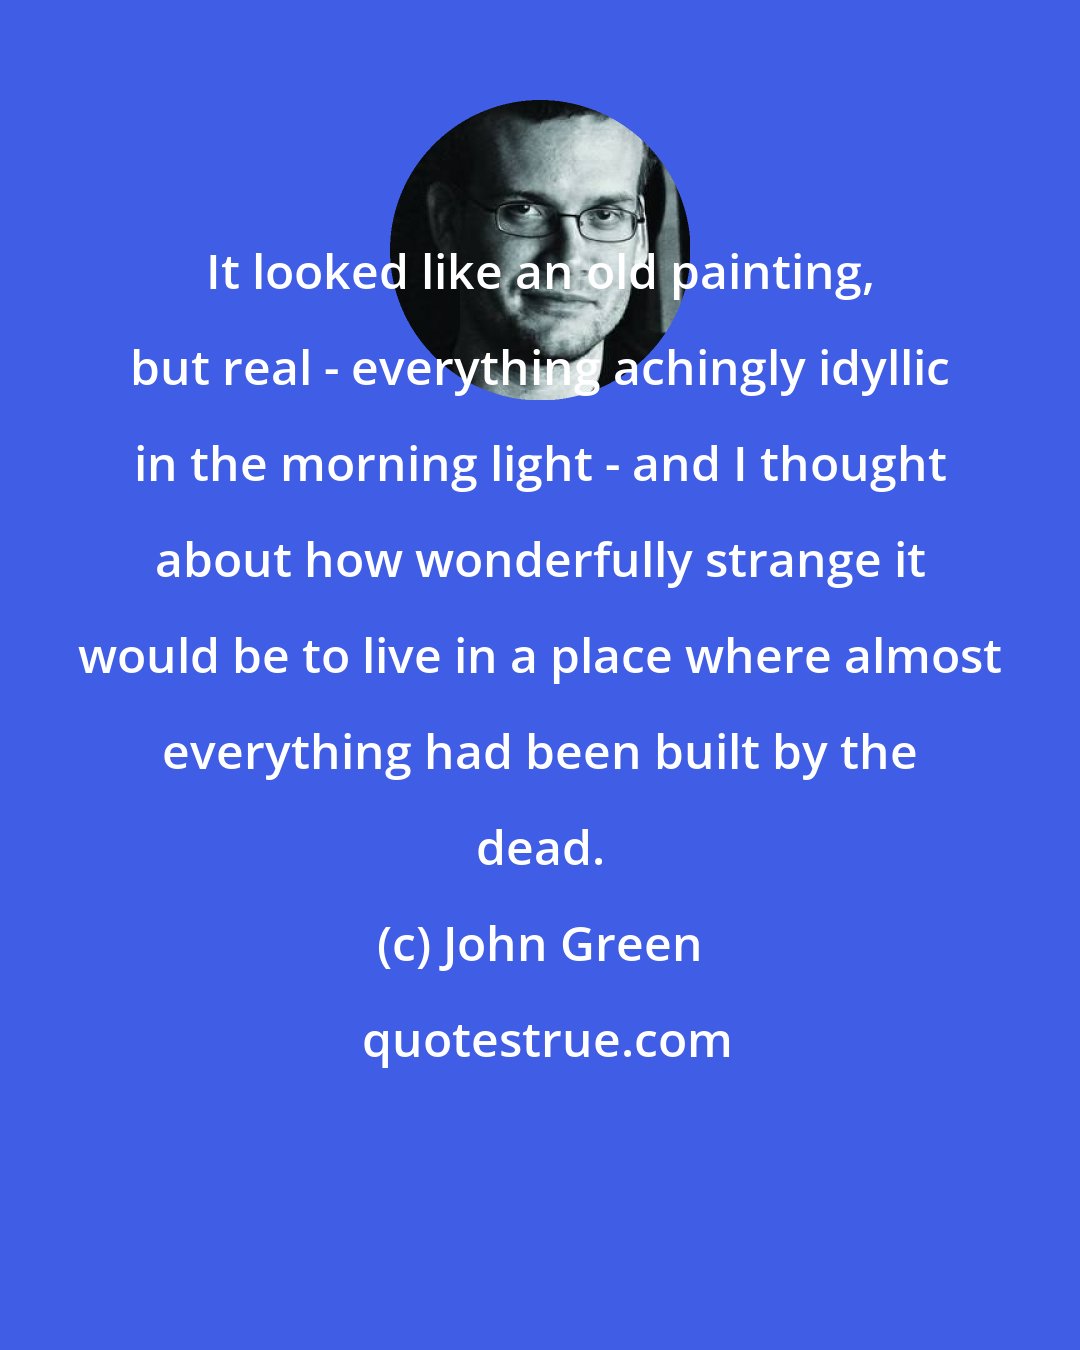 John Green: It looked like an old painting, but real - everything achingly idyllic in the morning light - and I thought about how wonderfully strange it would be to live in a place where almost everything had been built by the dead.